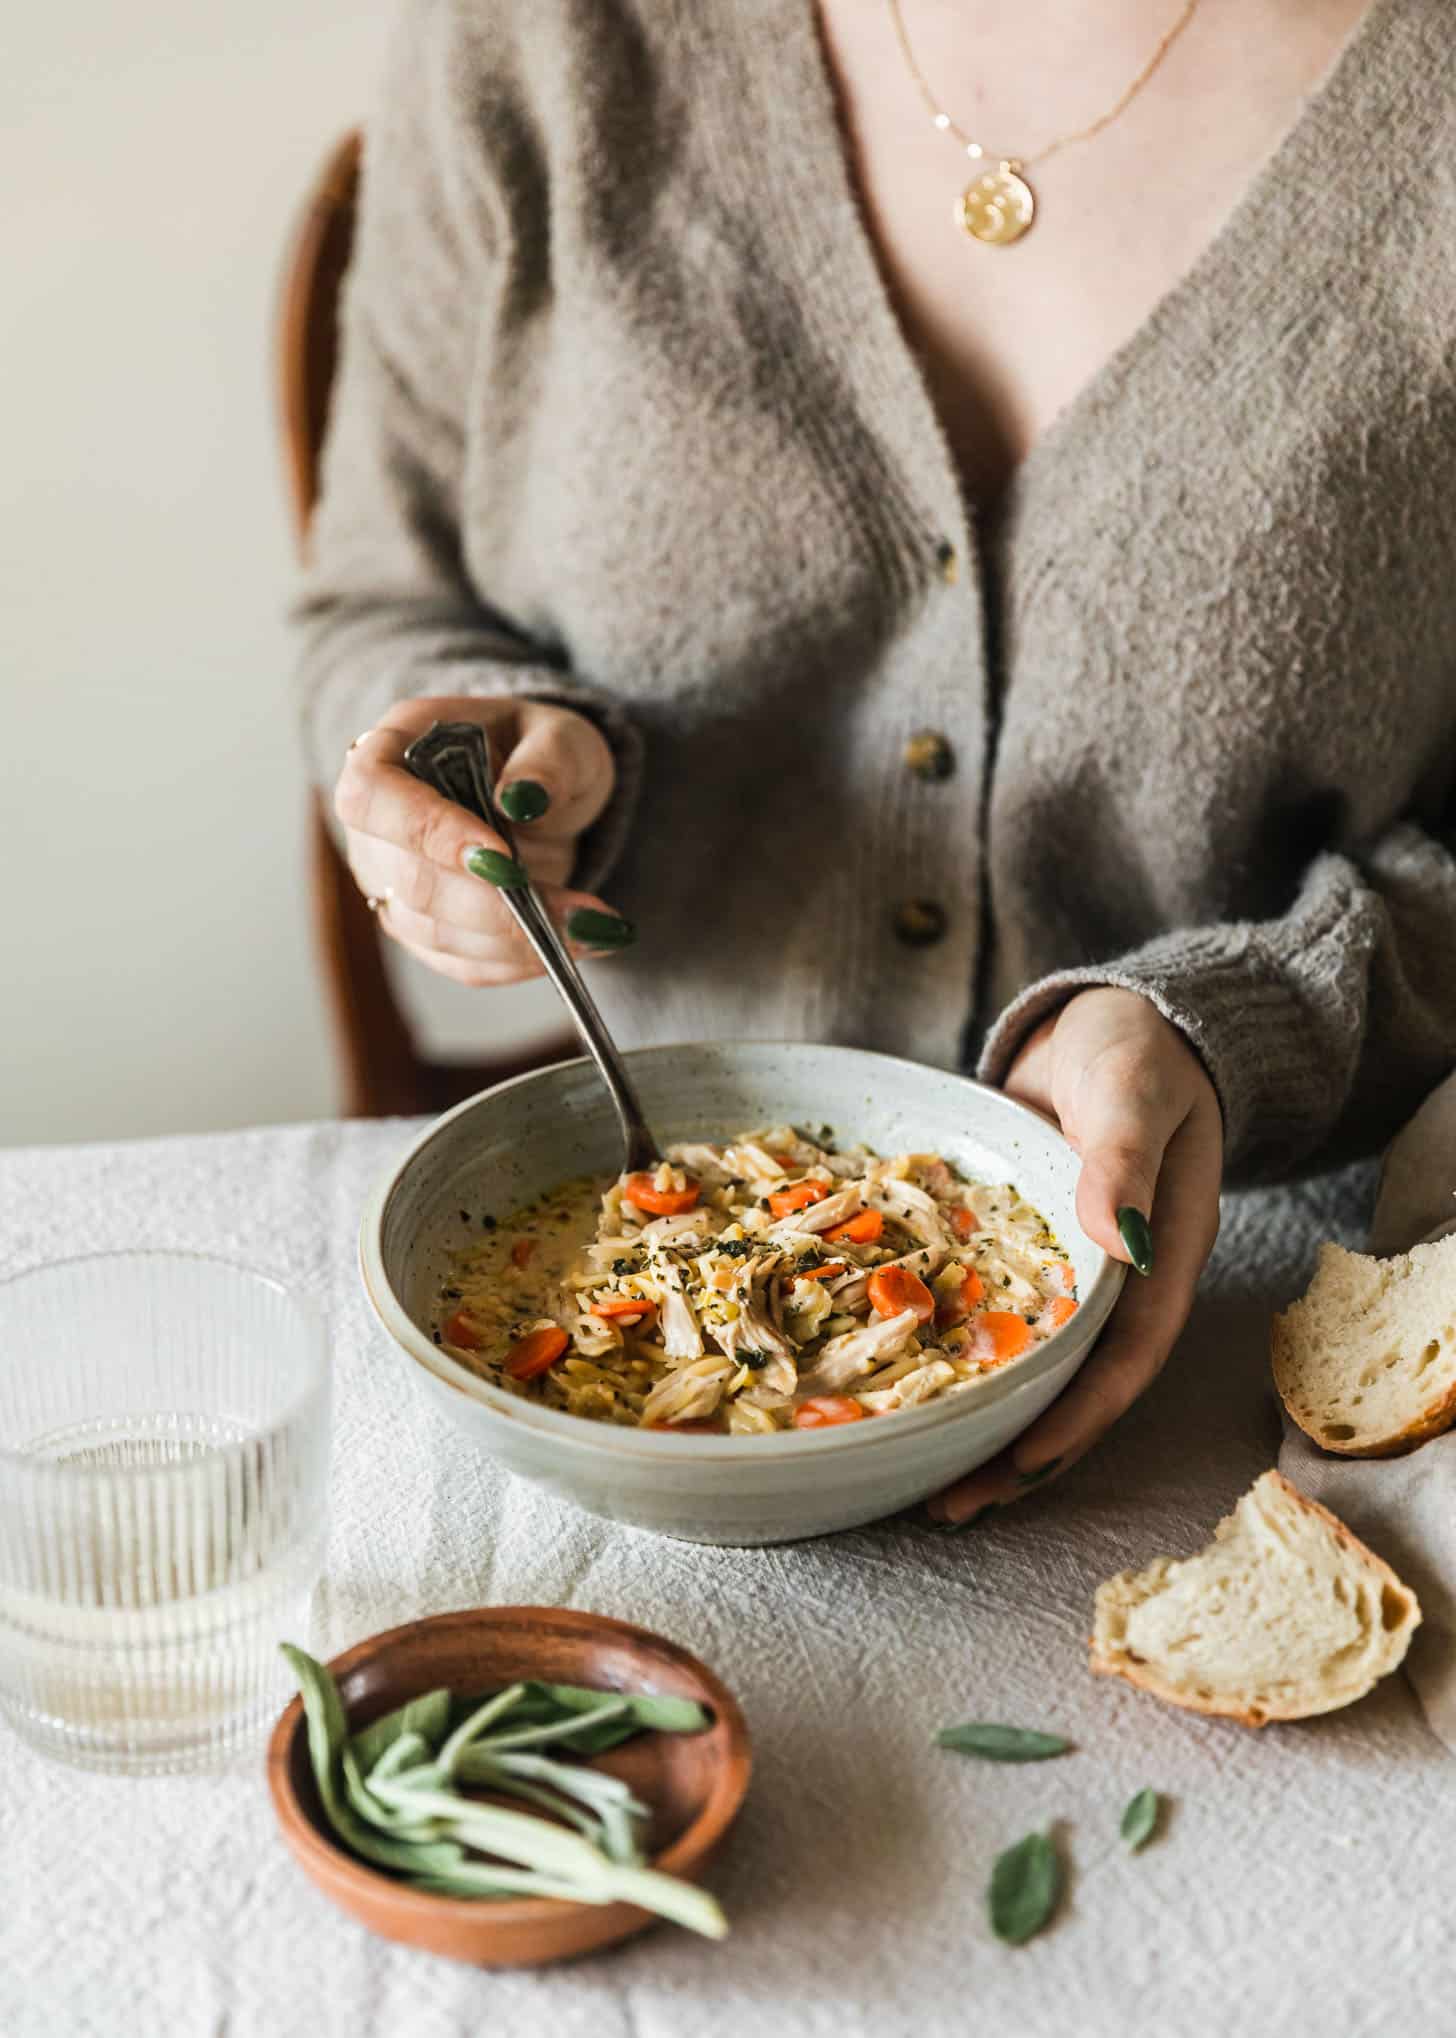 A woman in a beige sweater holding a grey bowl of creamy orzo turkey soup on a white tablecloth next to bread, white wine, and sage leaves.